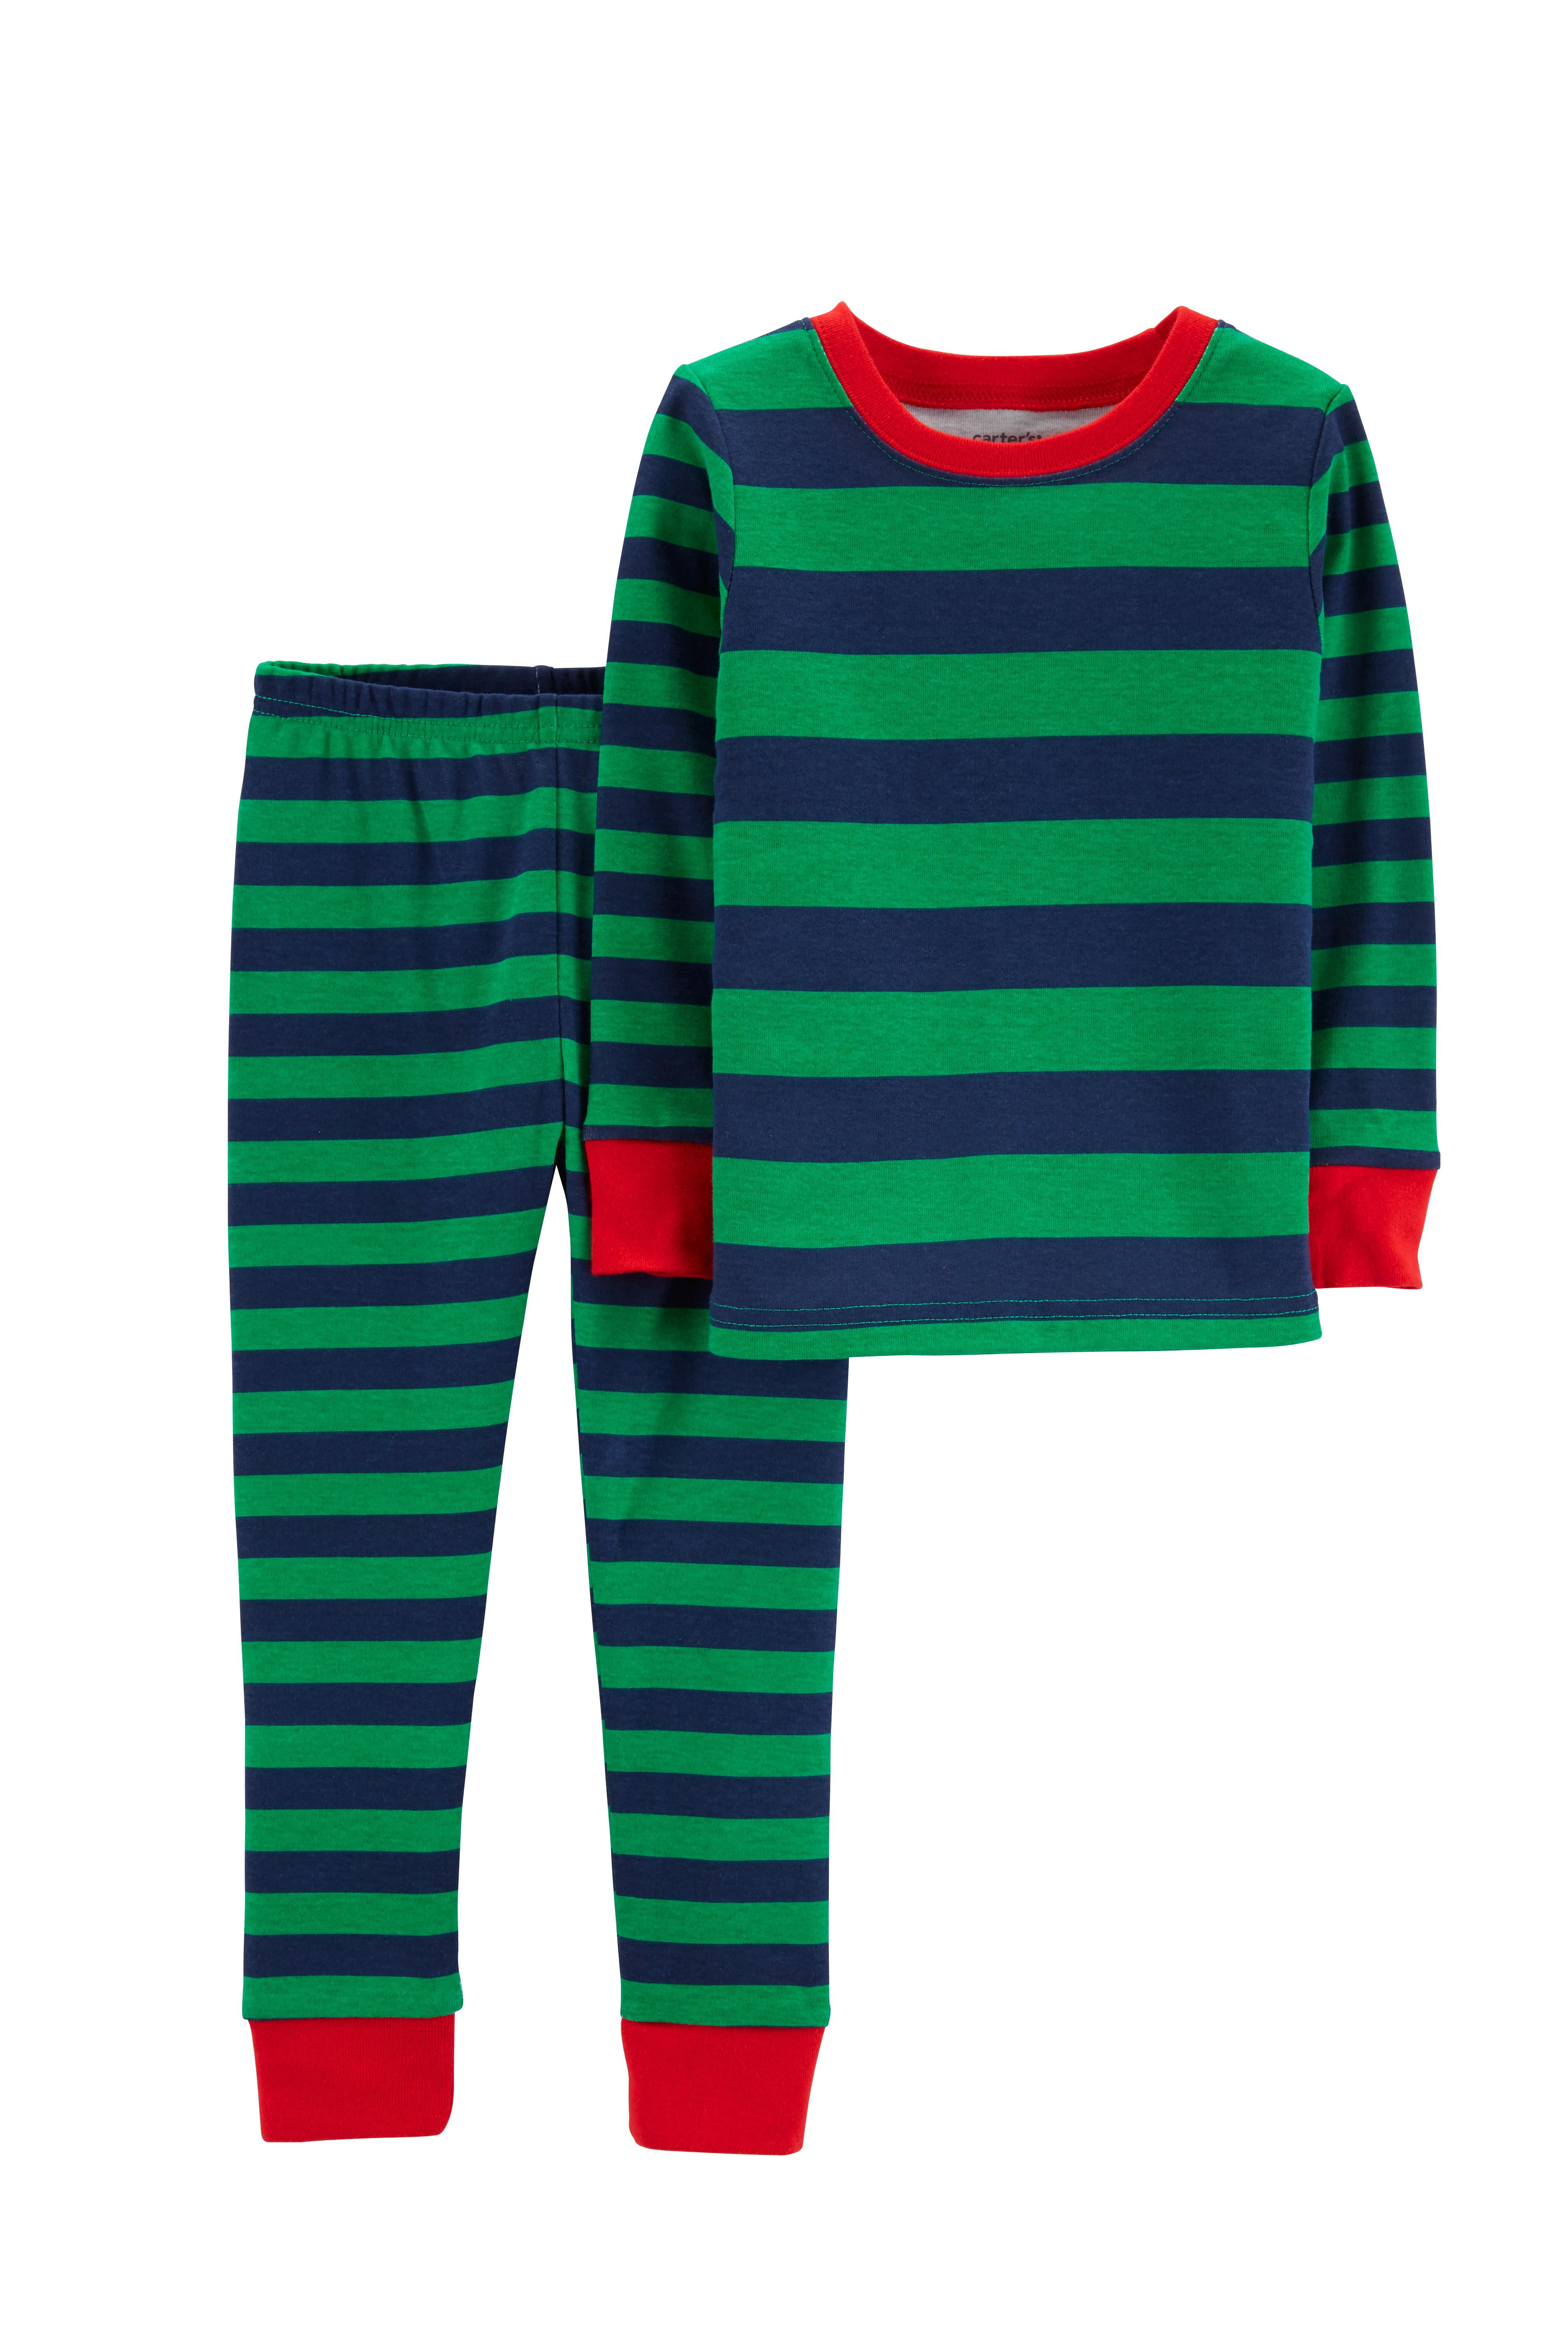 Carters Boys 1 Pc Poly 343g061 